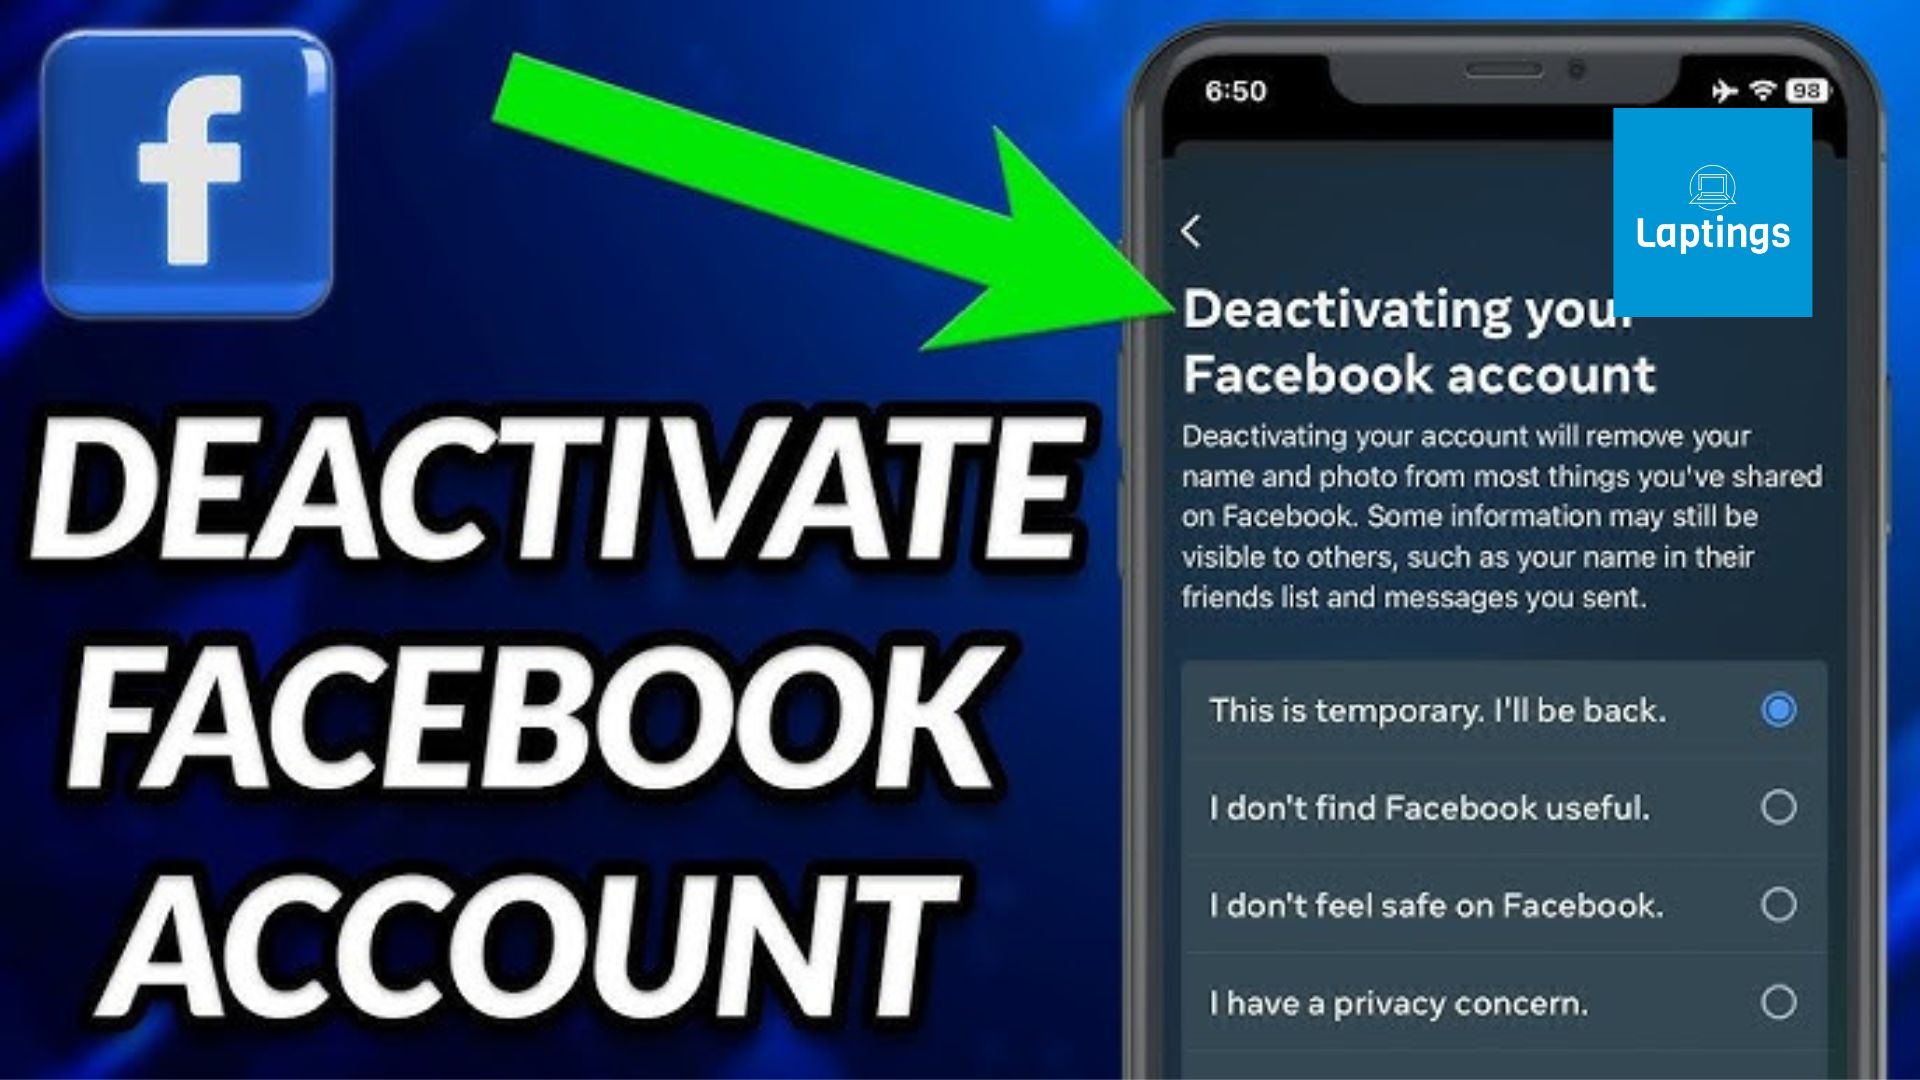 The Digital Detox How to Deactivate Facebook laptings